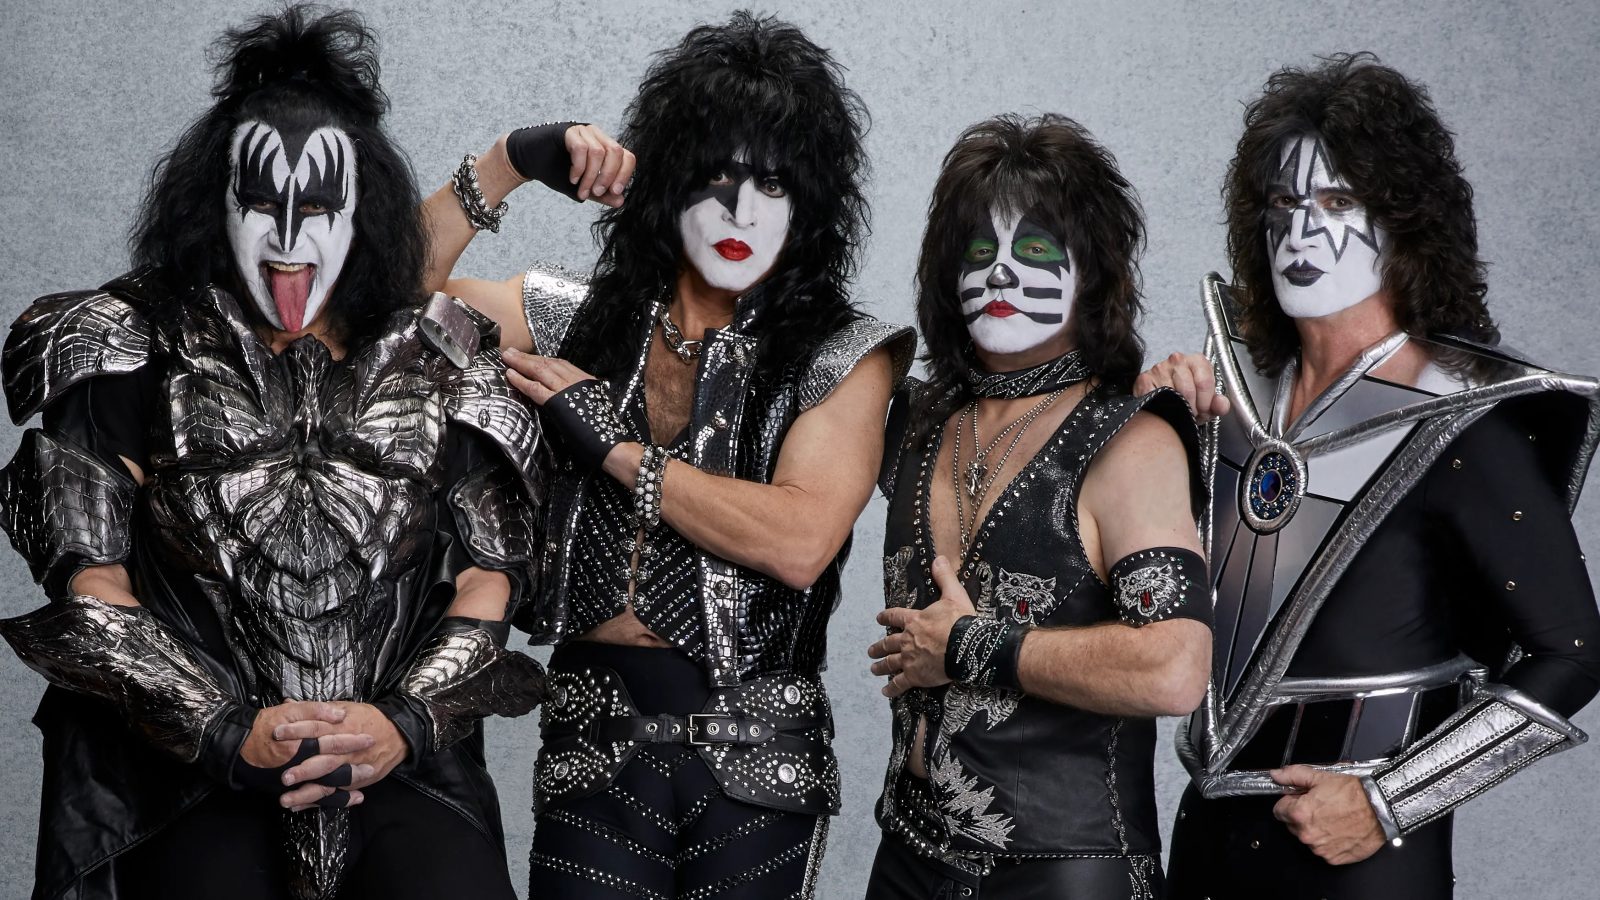 This 25-Question General Knowledge Quiz Will Determine If You Know a Little or a Lot Kiss rock band